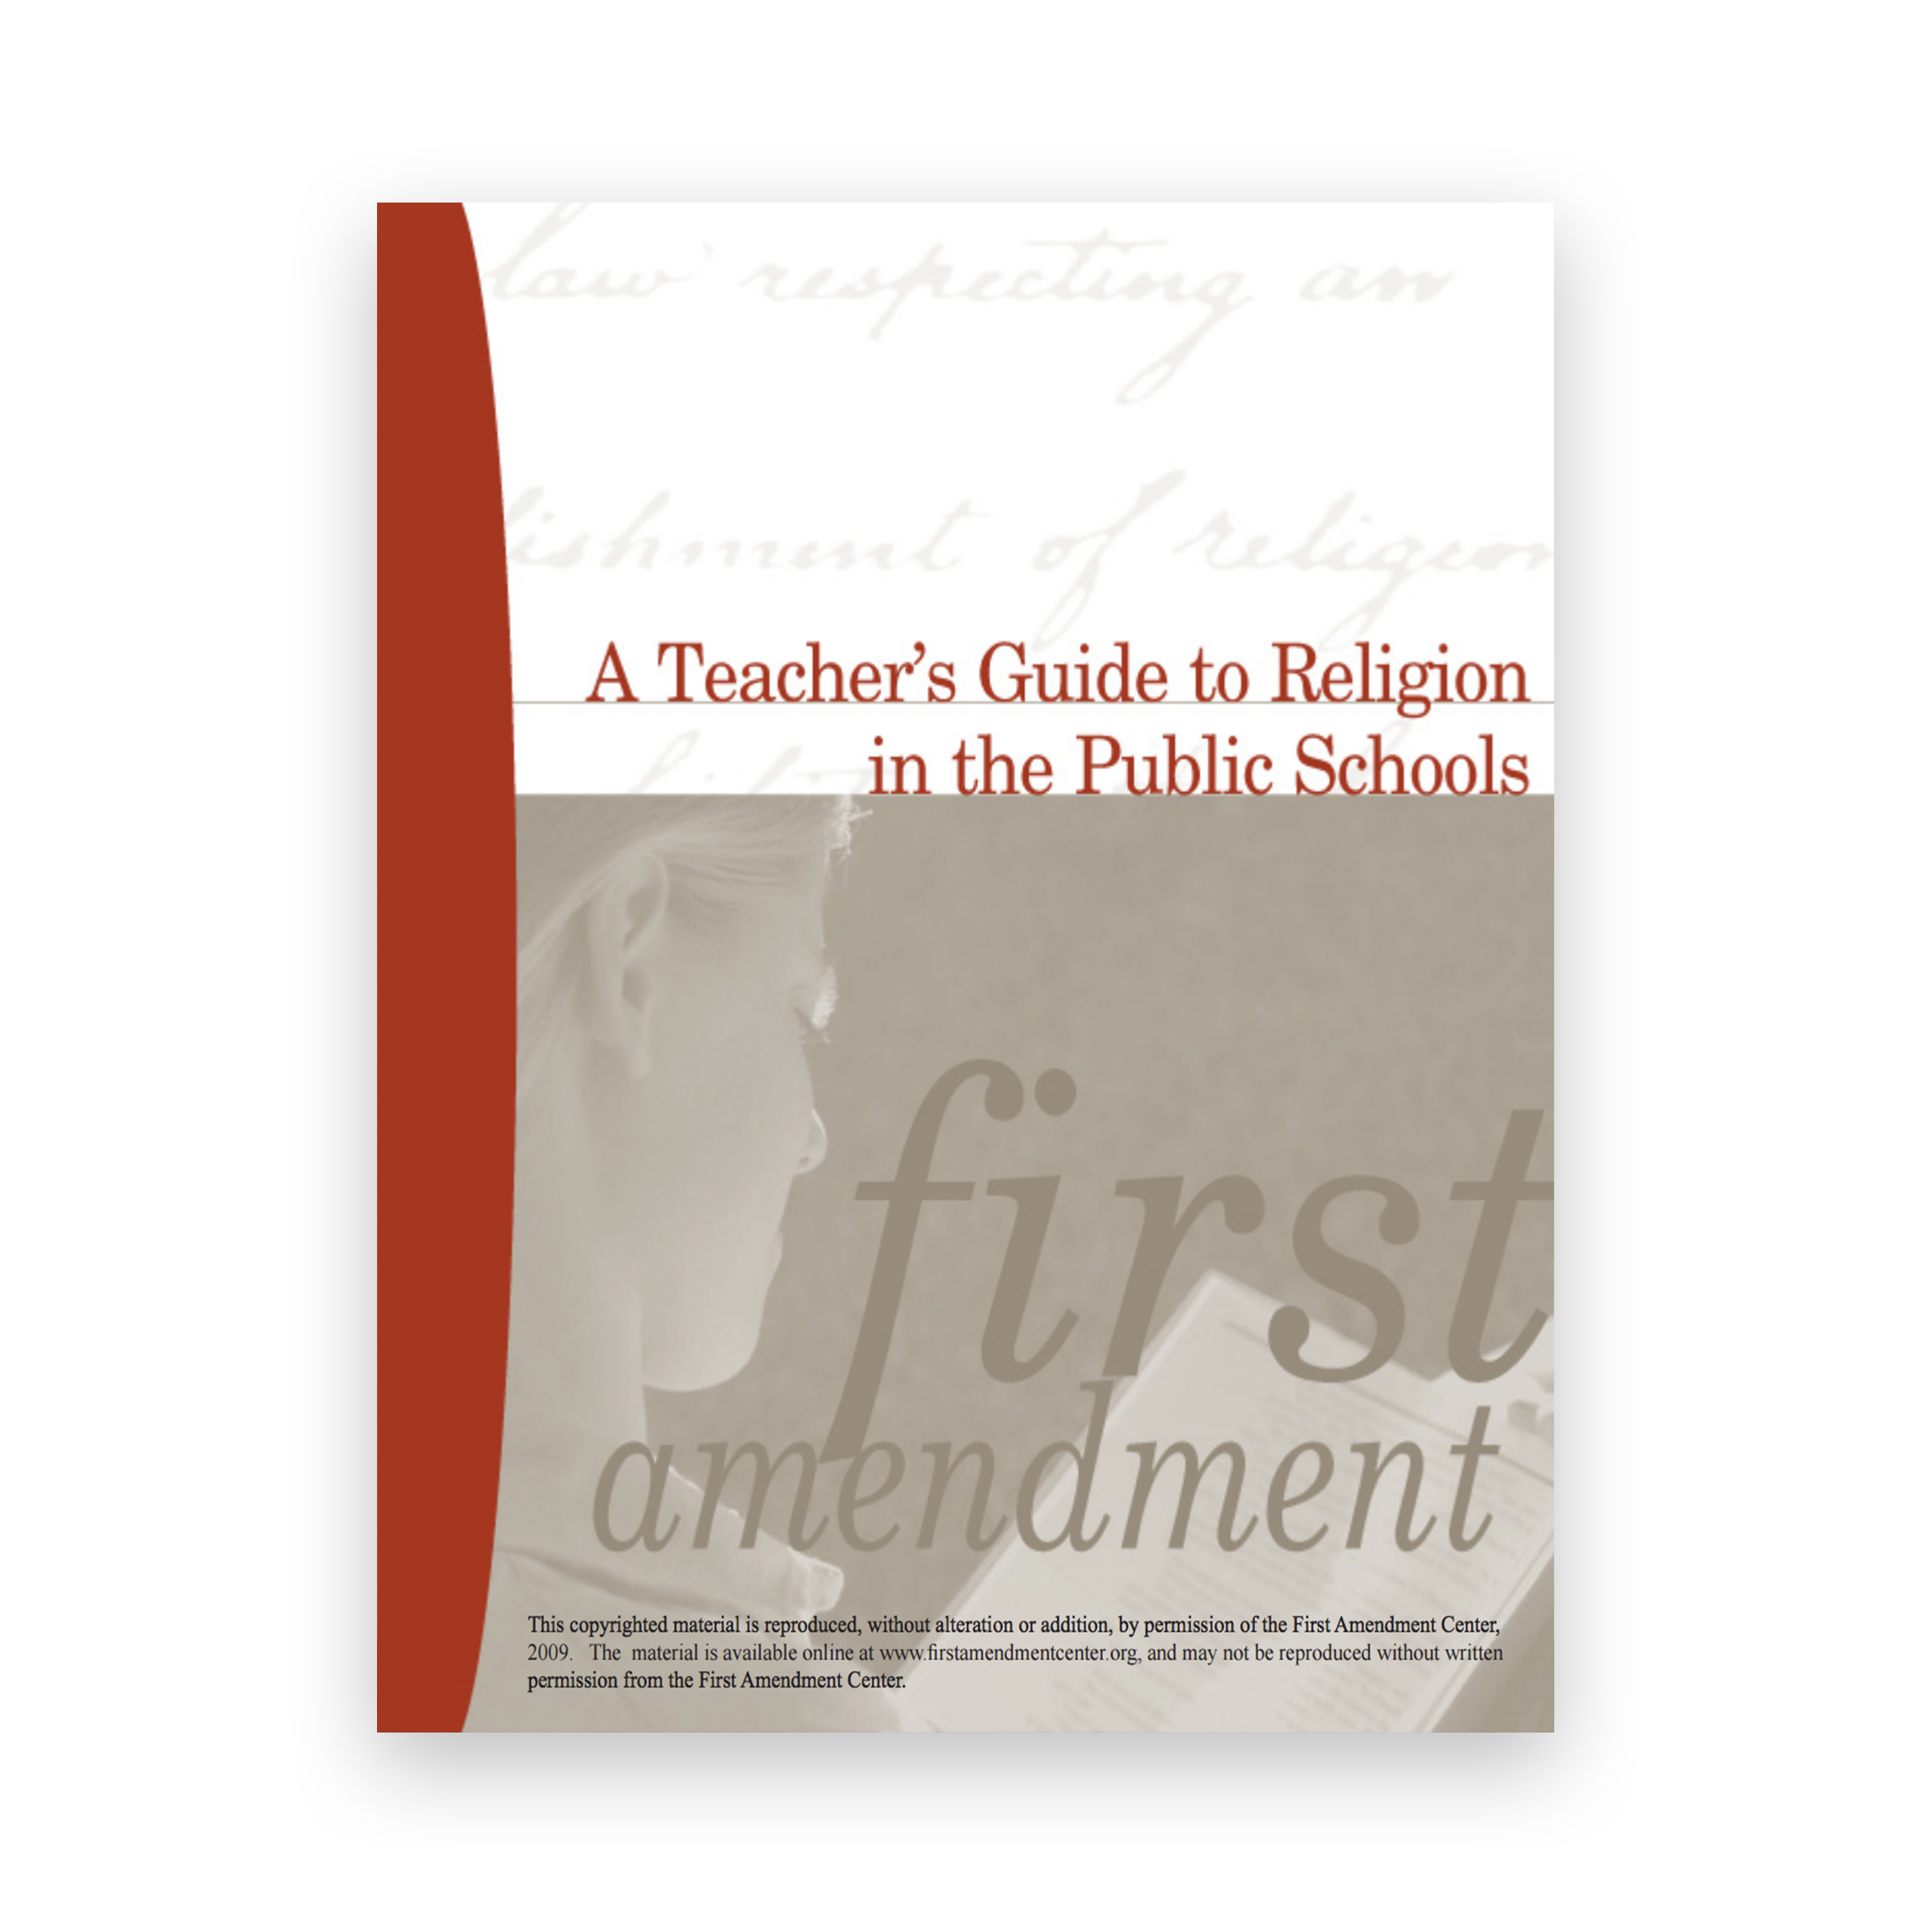 A Teacher’s Guide to Religion in the Public